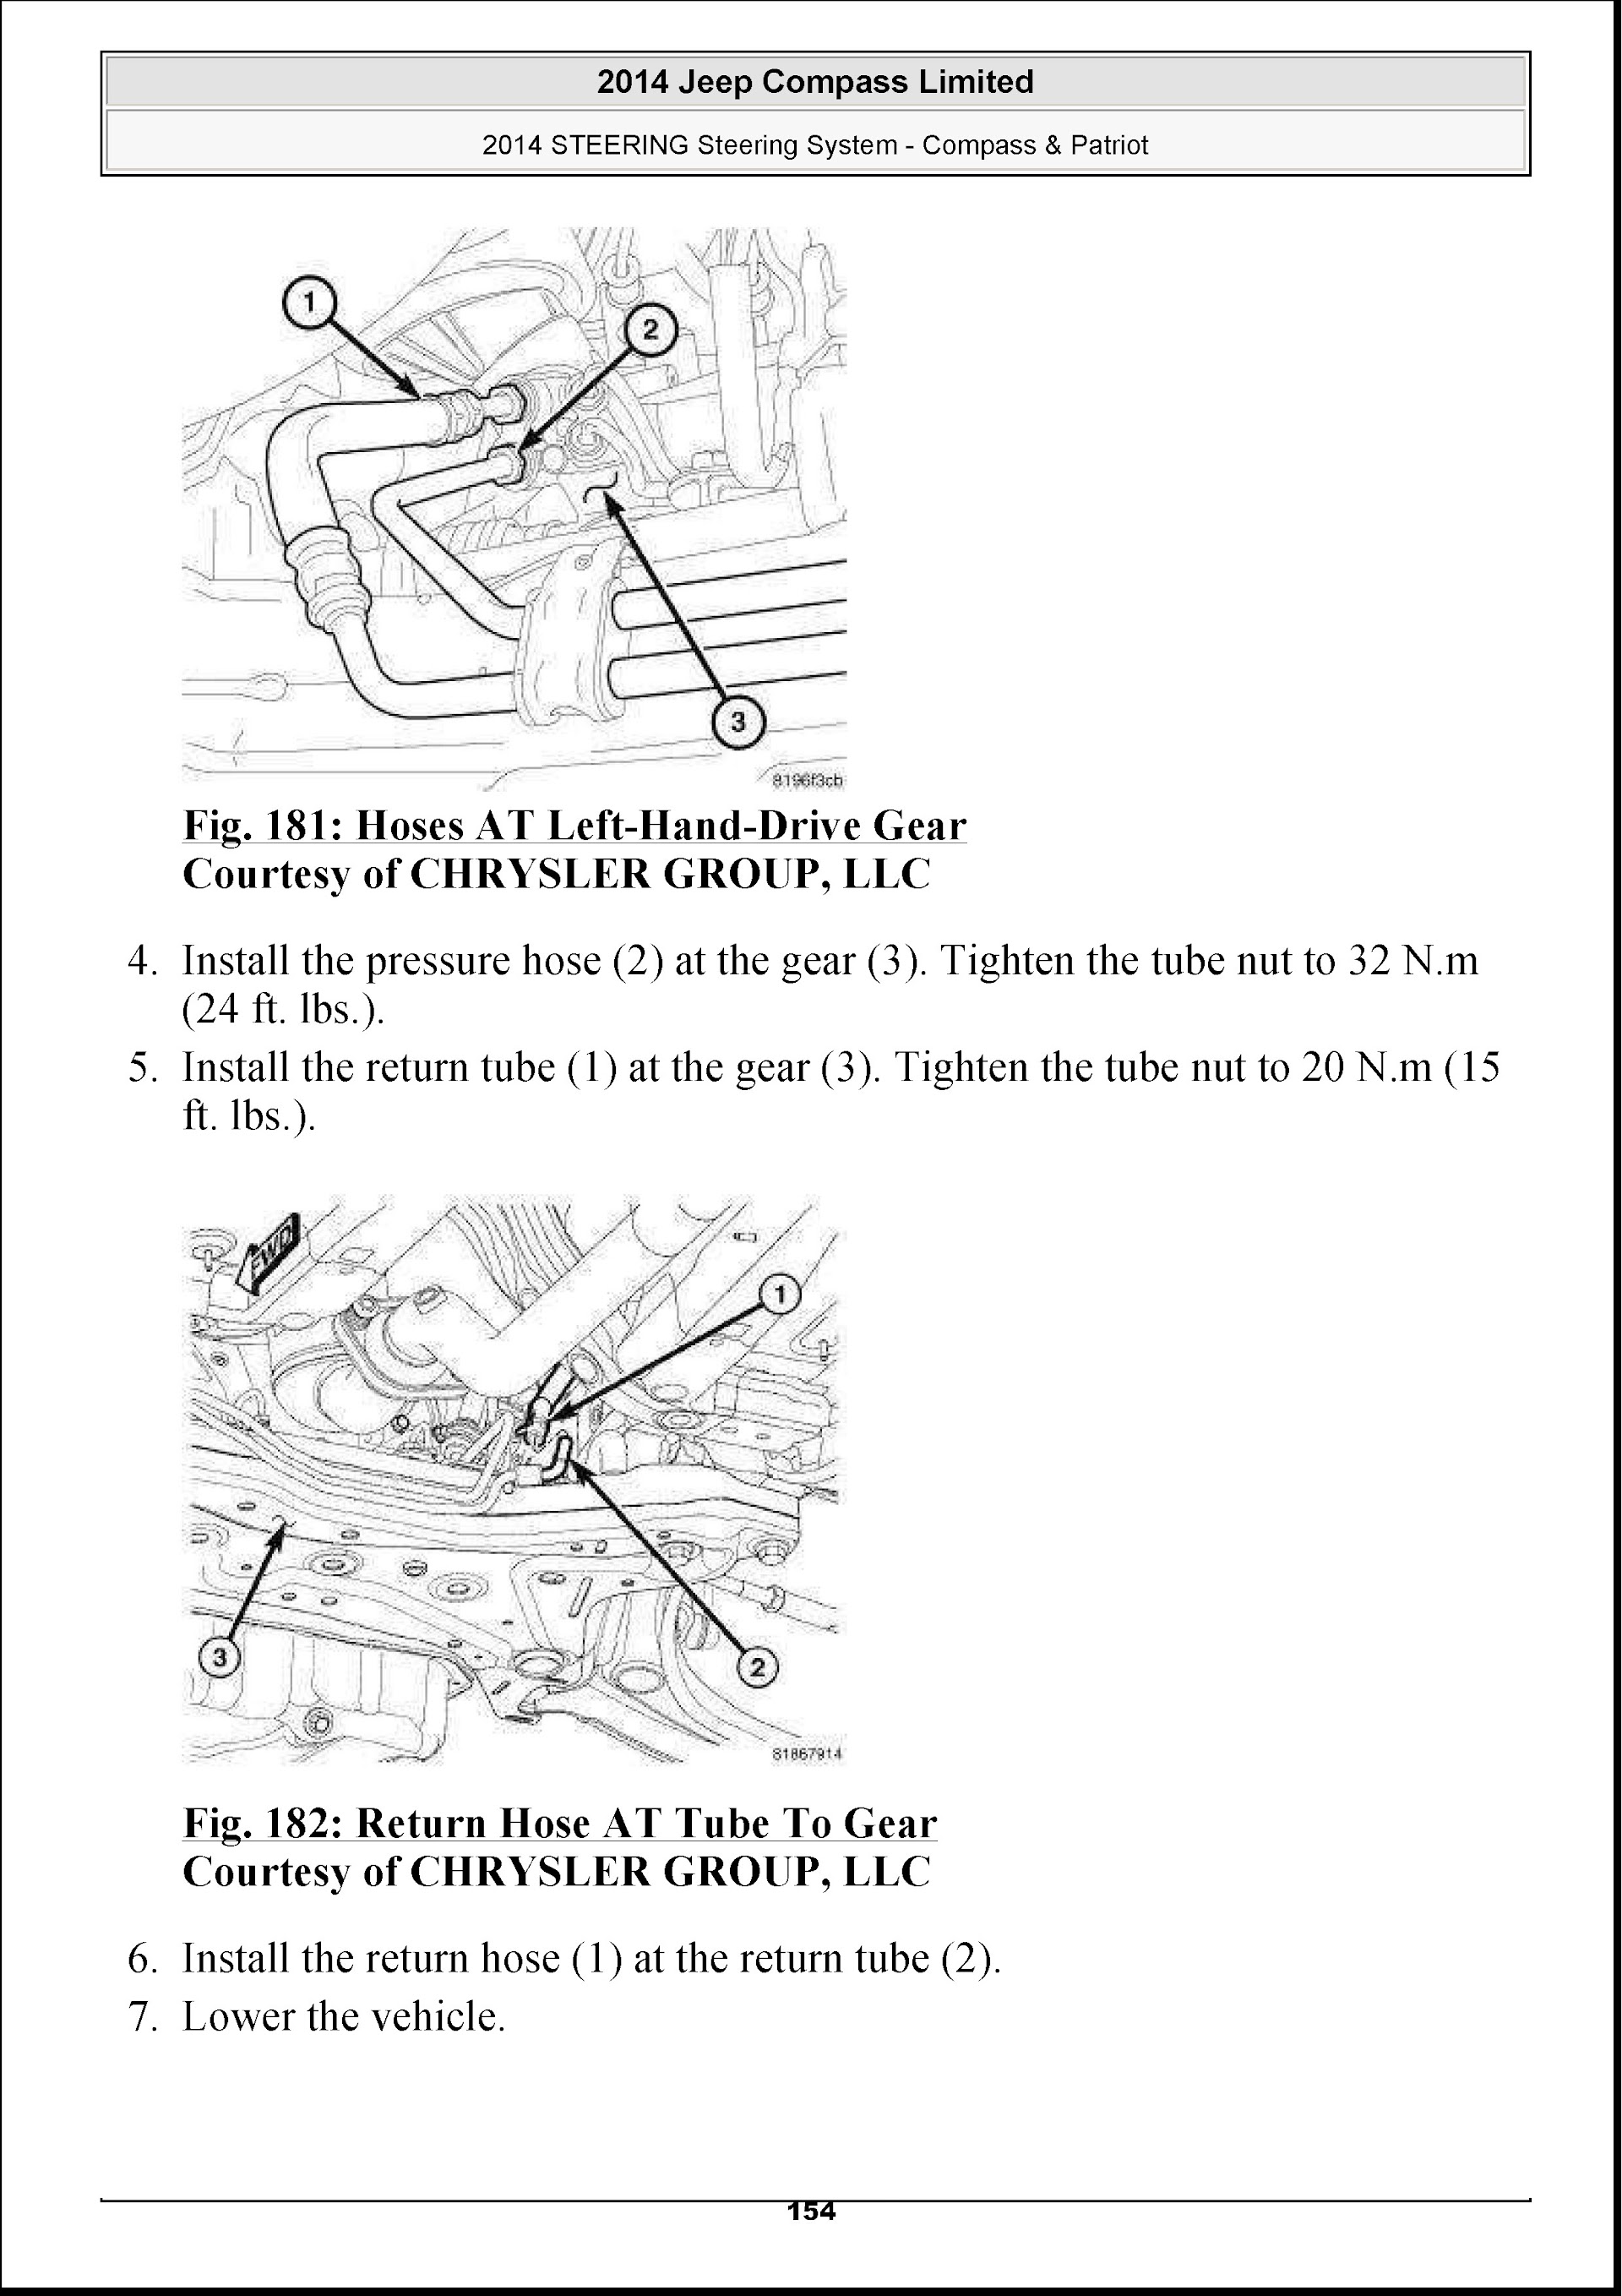 2014-2016 Jeep Compass and Patriot Repair Manual, Steering System